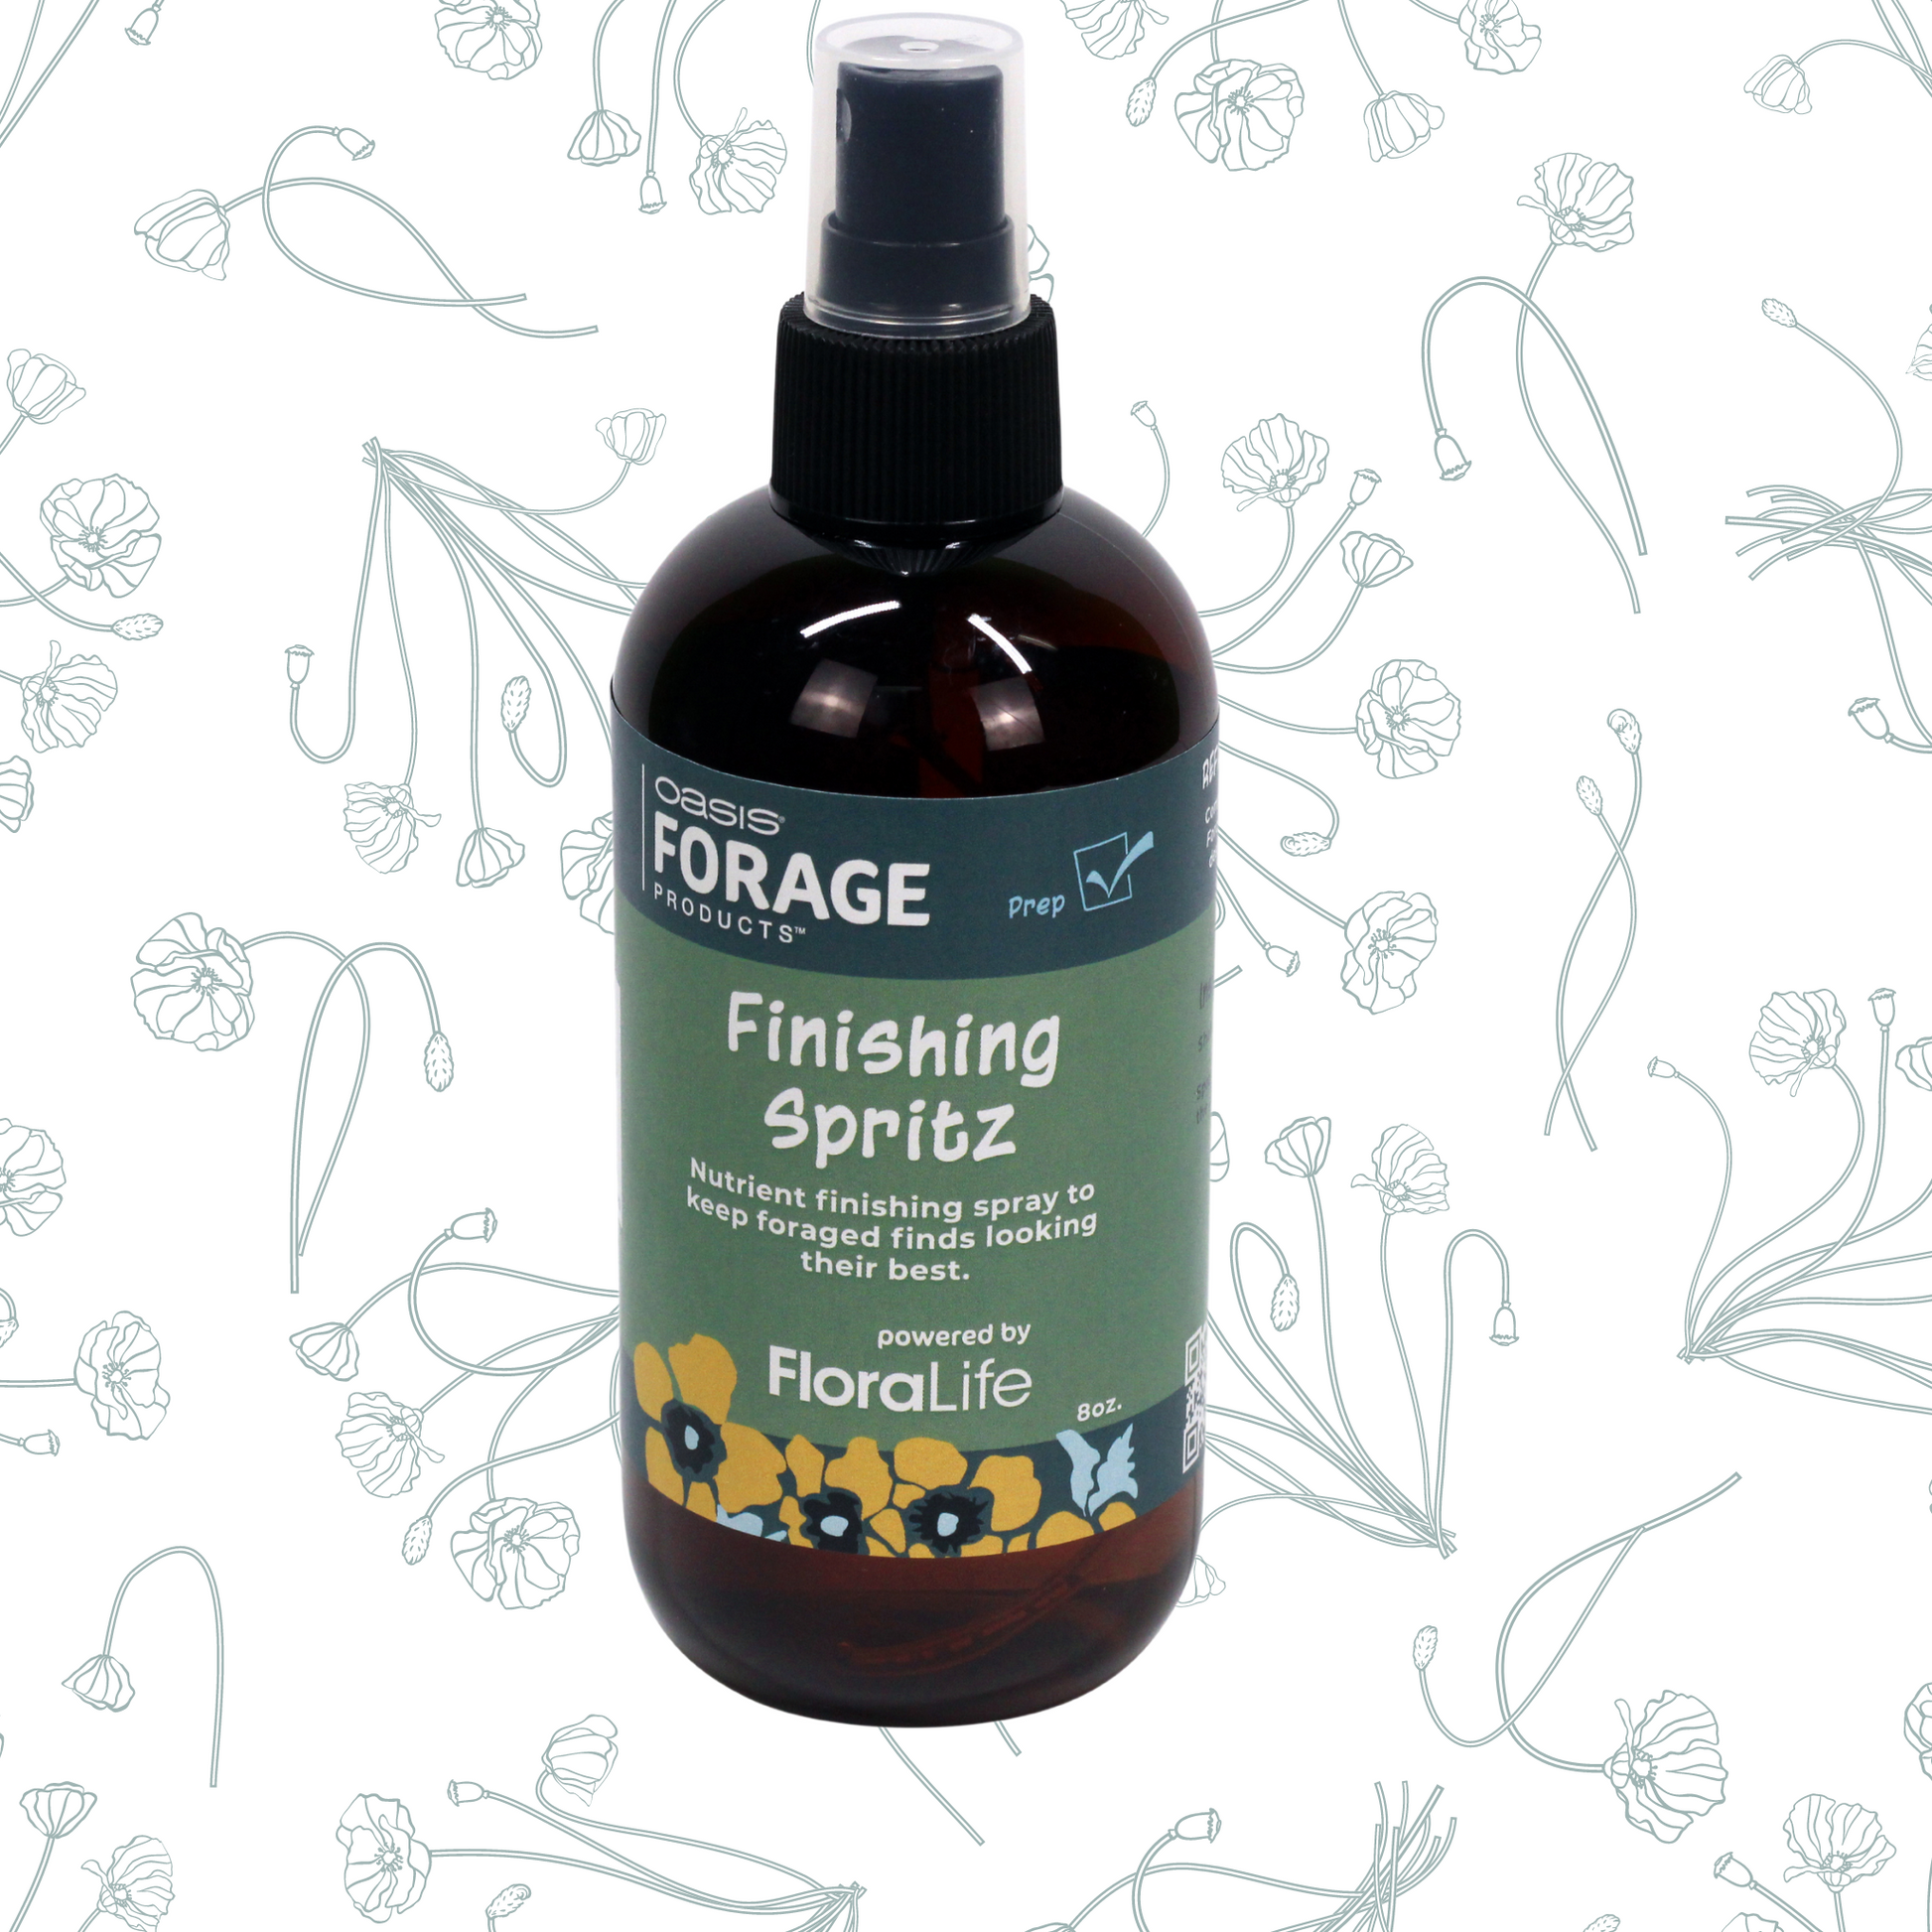 Finishing Spritz, a nutrient finishing spray to keep foraged find looking their best. Comes in an 8oz. Bottle